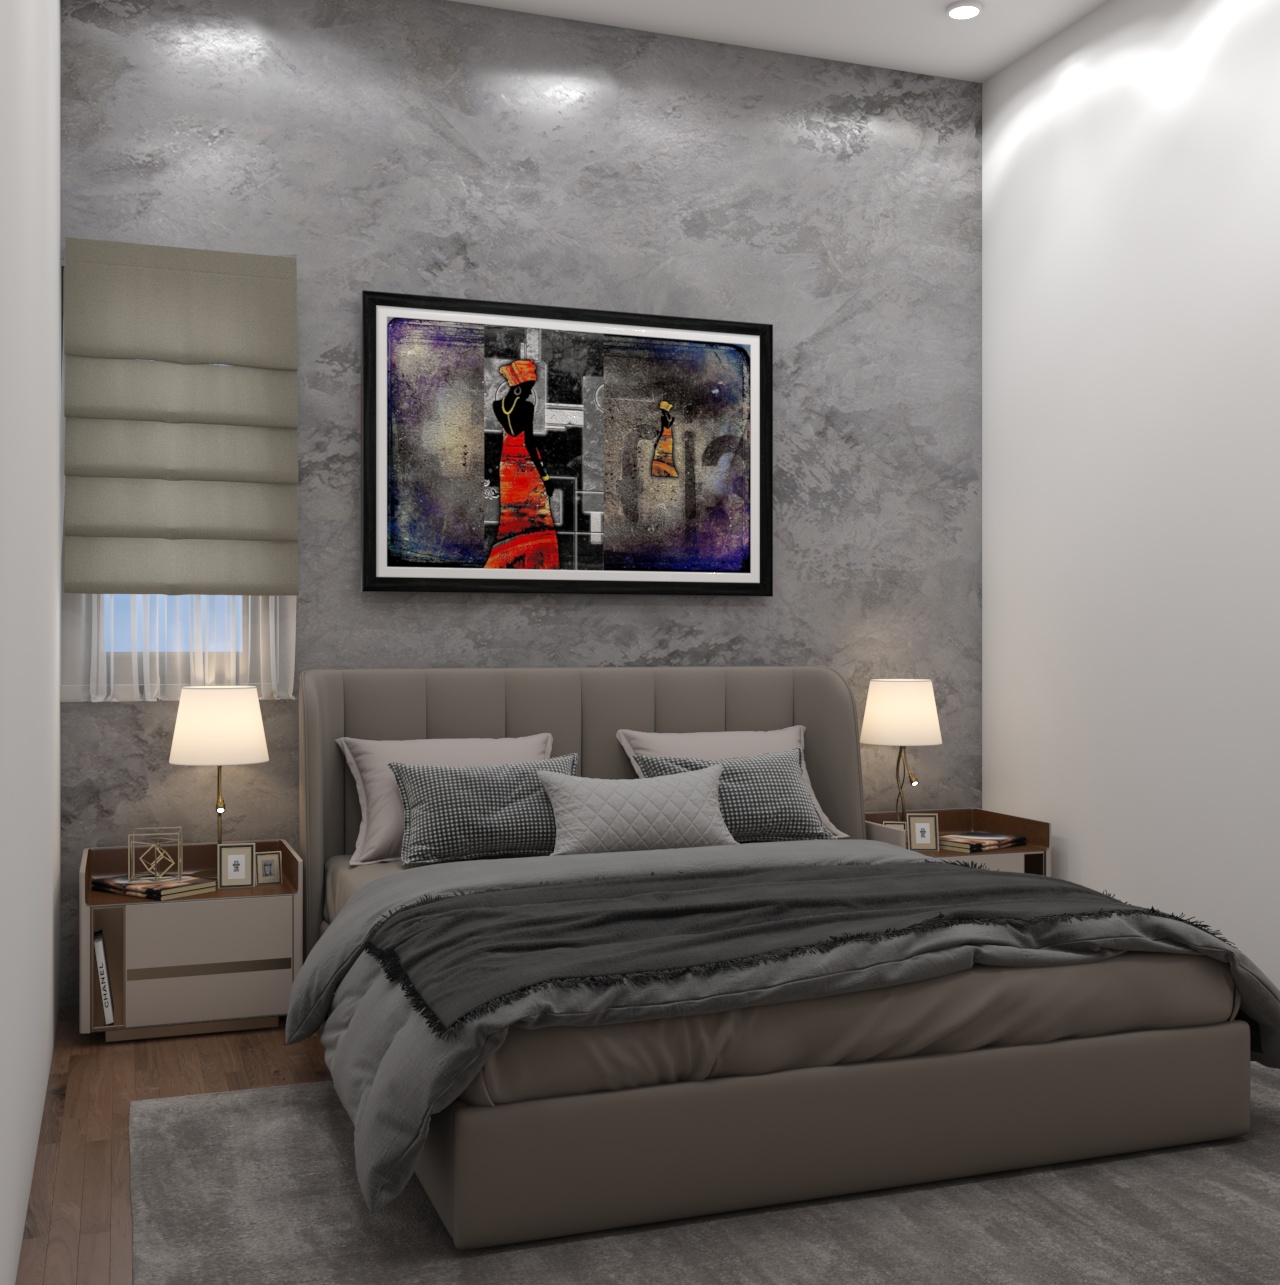 Once you figure out what kind of bedroom you would like (we have a huge cache of designs for your selection) we’ll help you visualize it in 3D, and actualize your private space where you can literally have happy dreams.